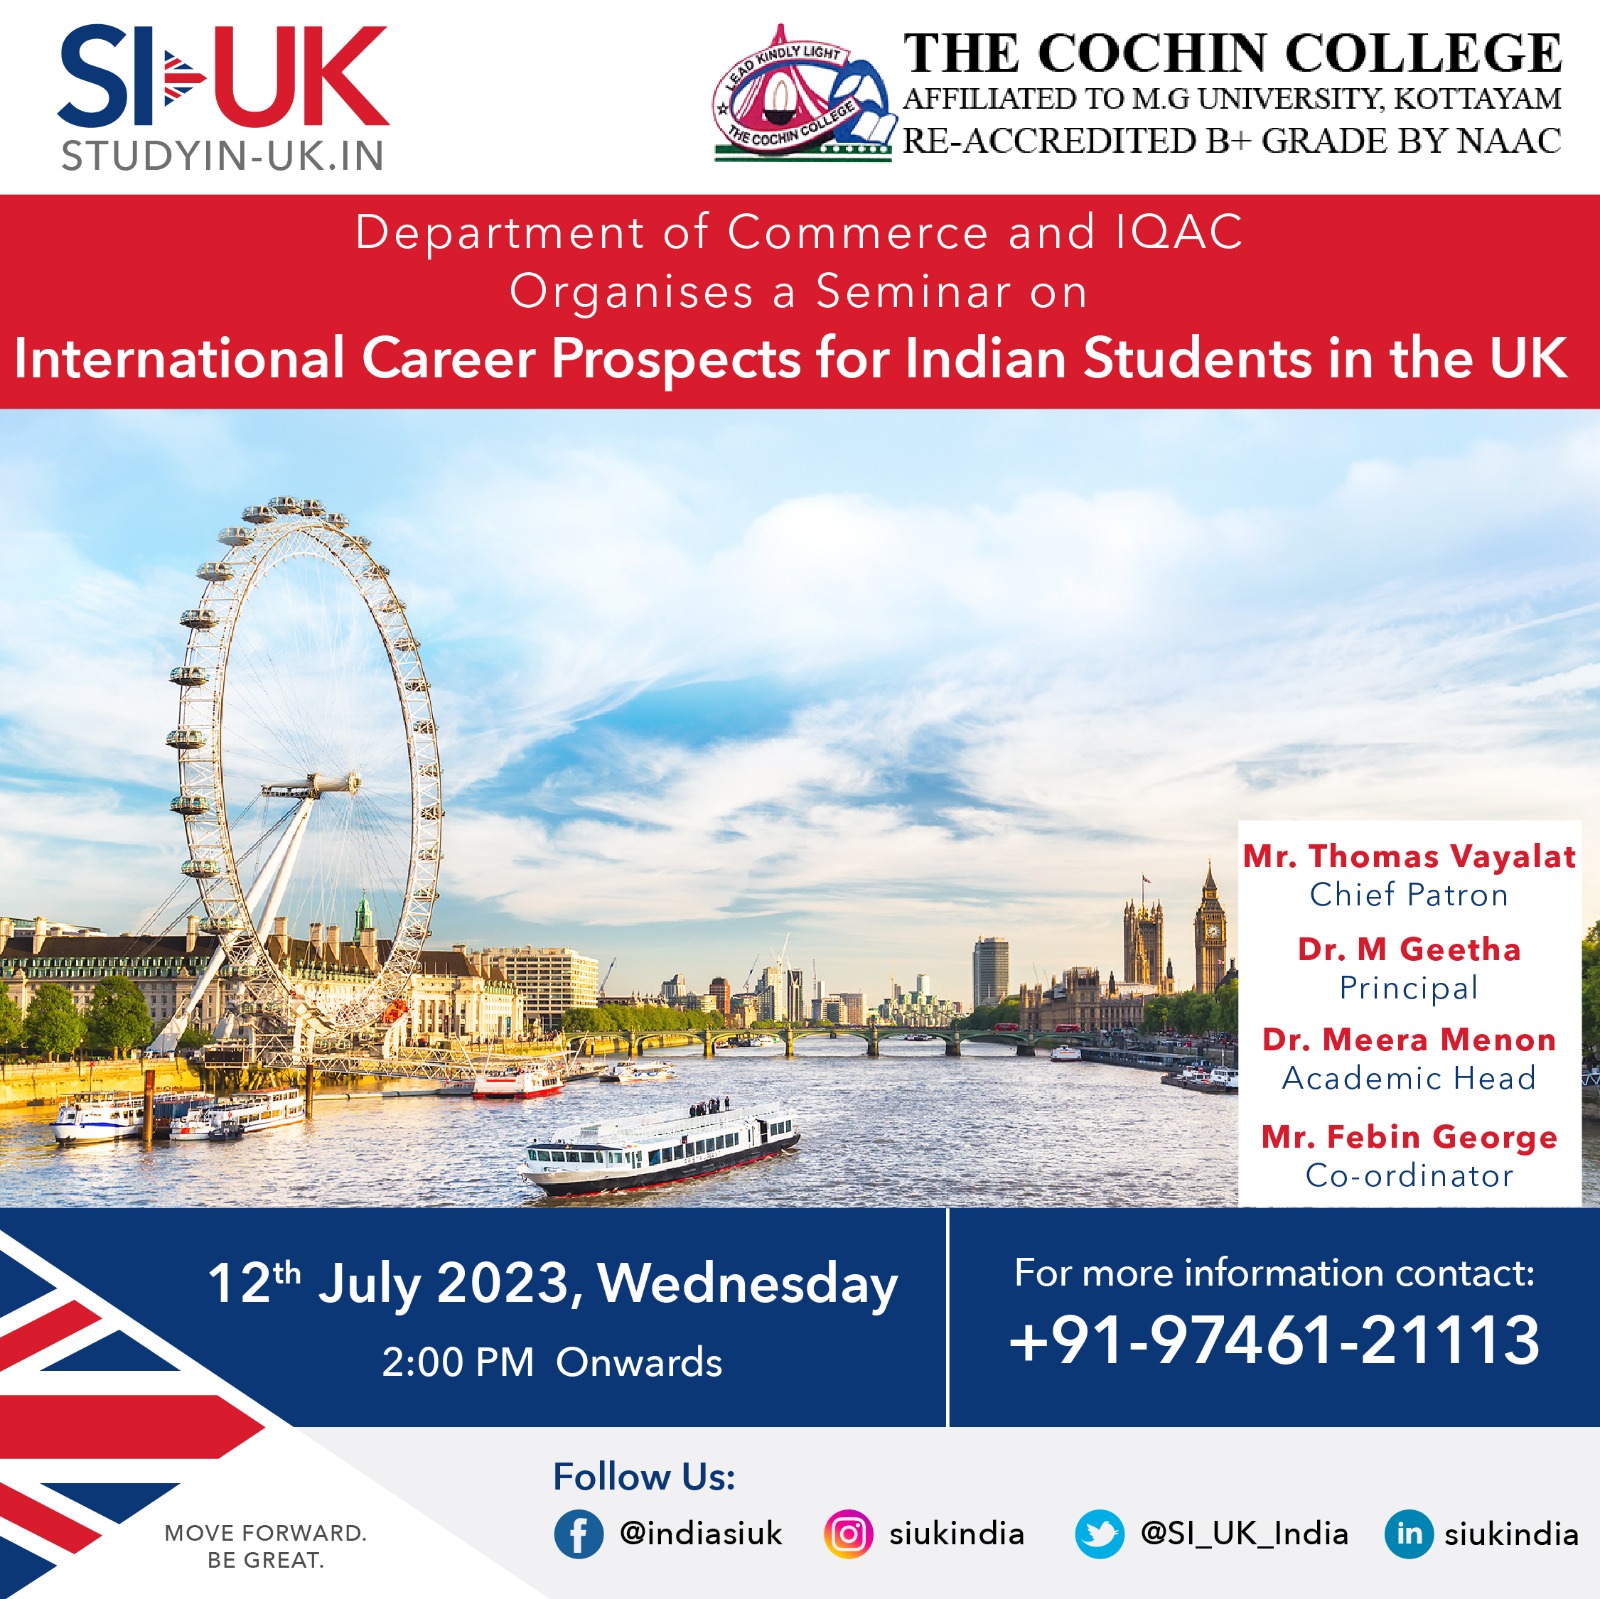 International Career Prospects for Indian Students in the UK